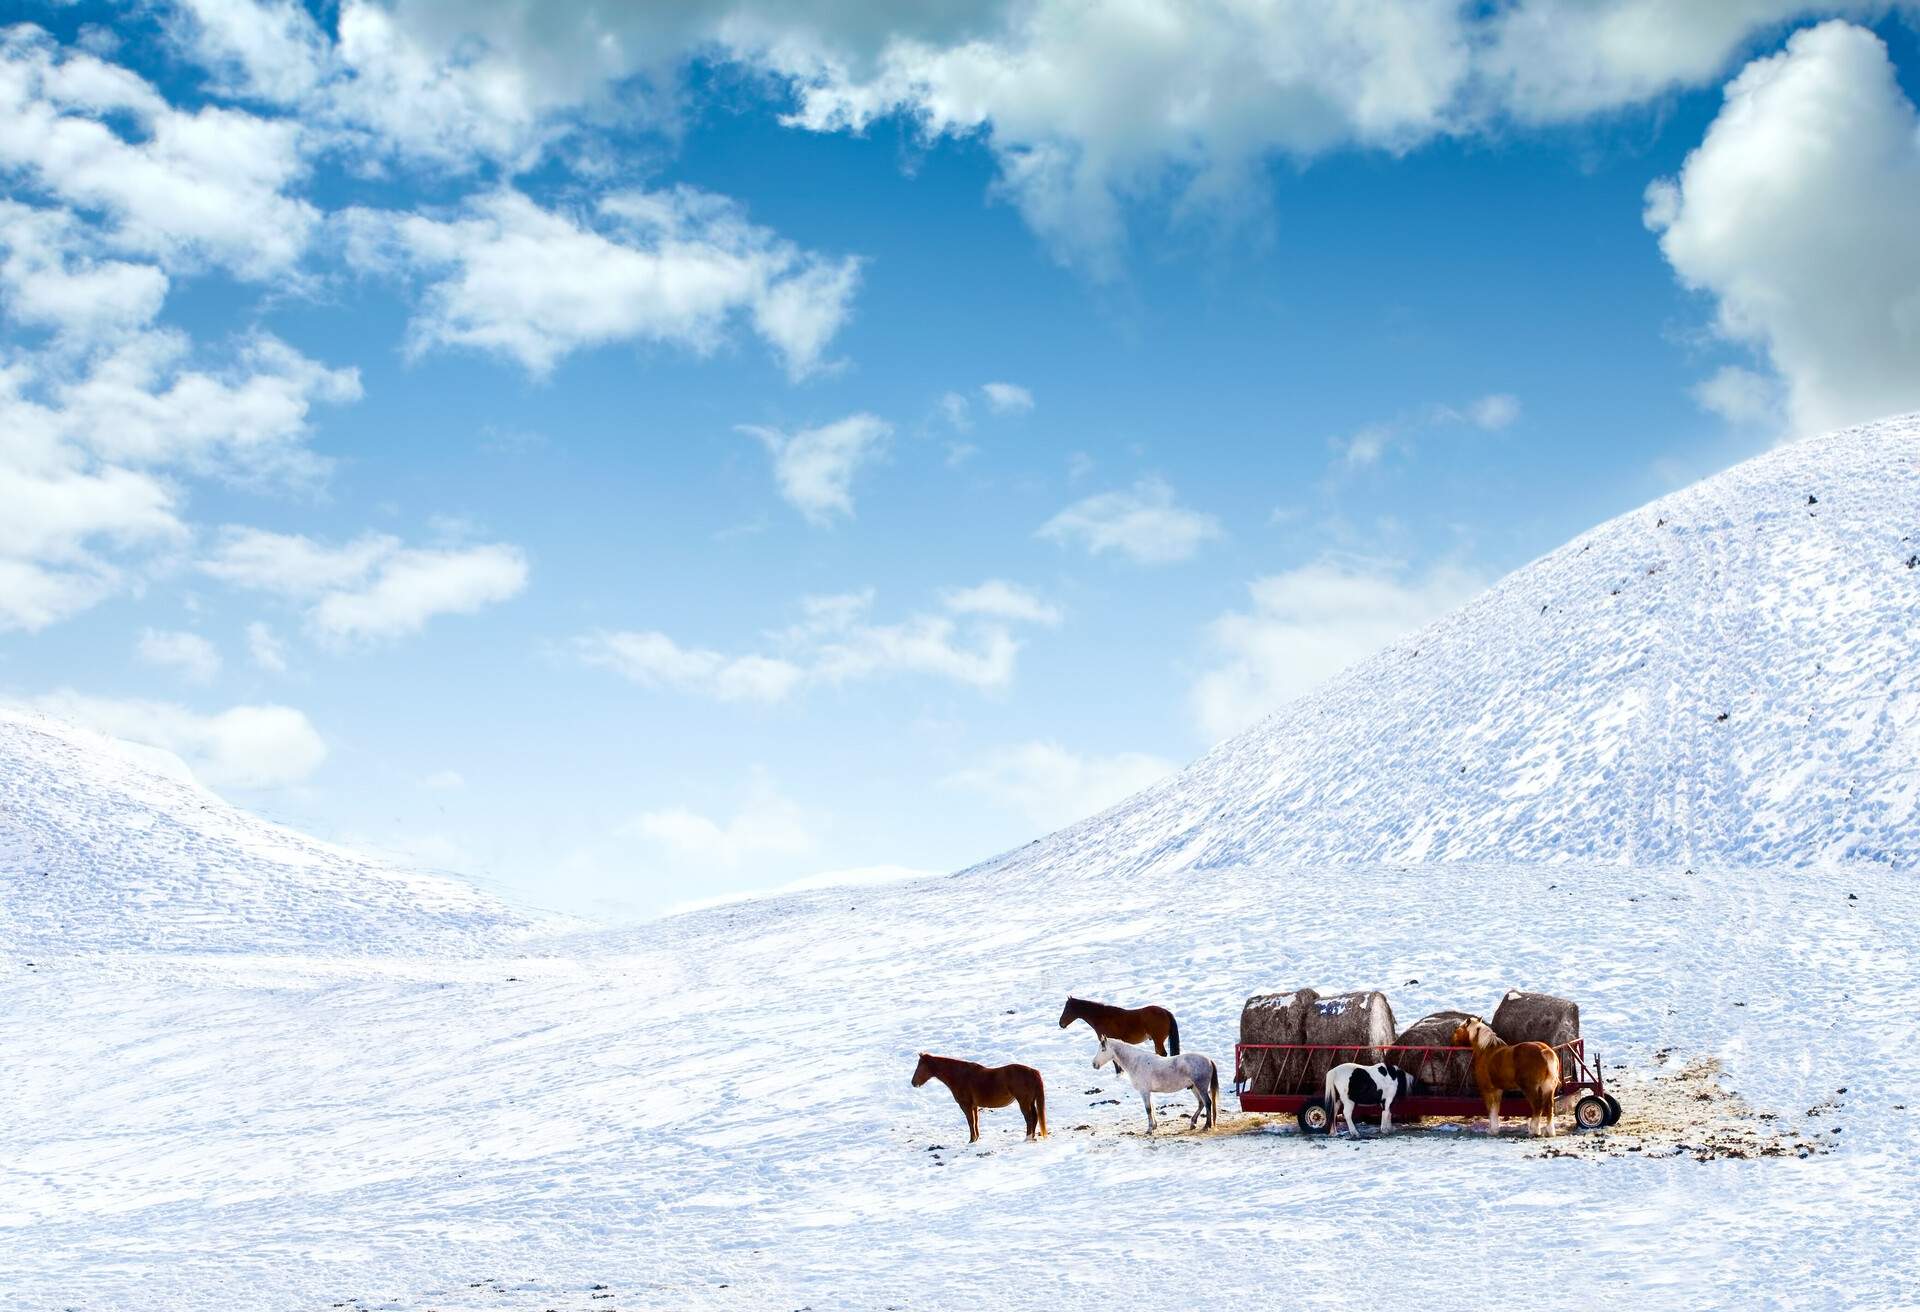 Horses and carriages loaded with large logs on snowy hills.